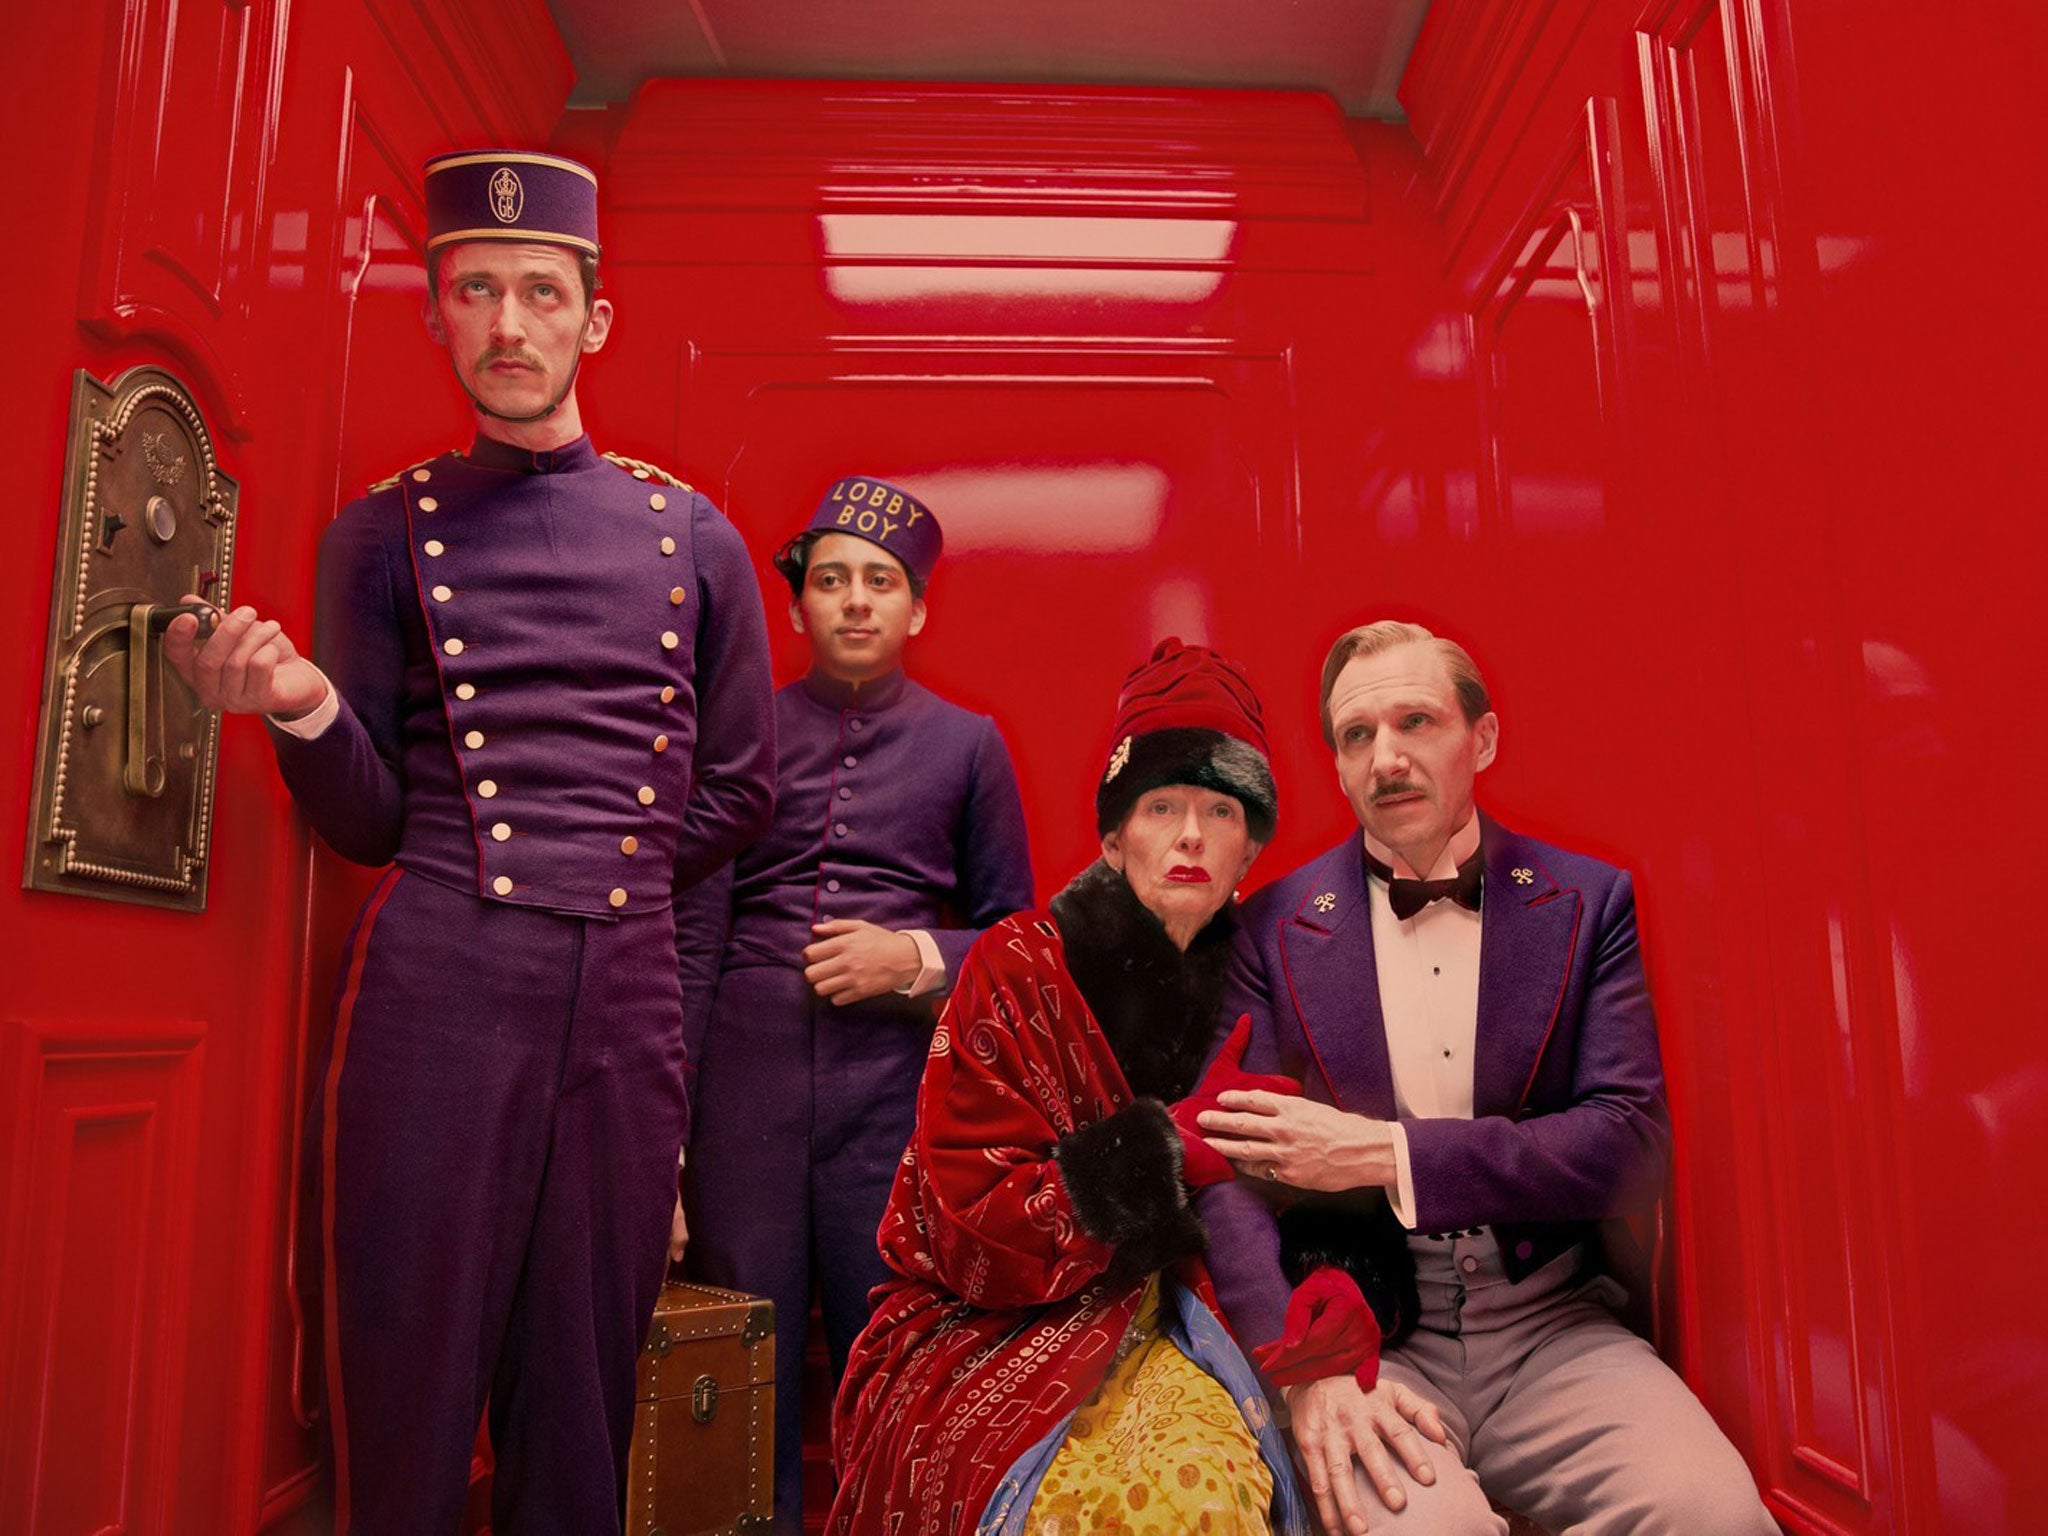 Wes Anderson's The Grand Budapest Hotel is up for ten Oscars